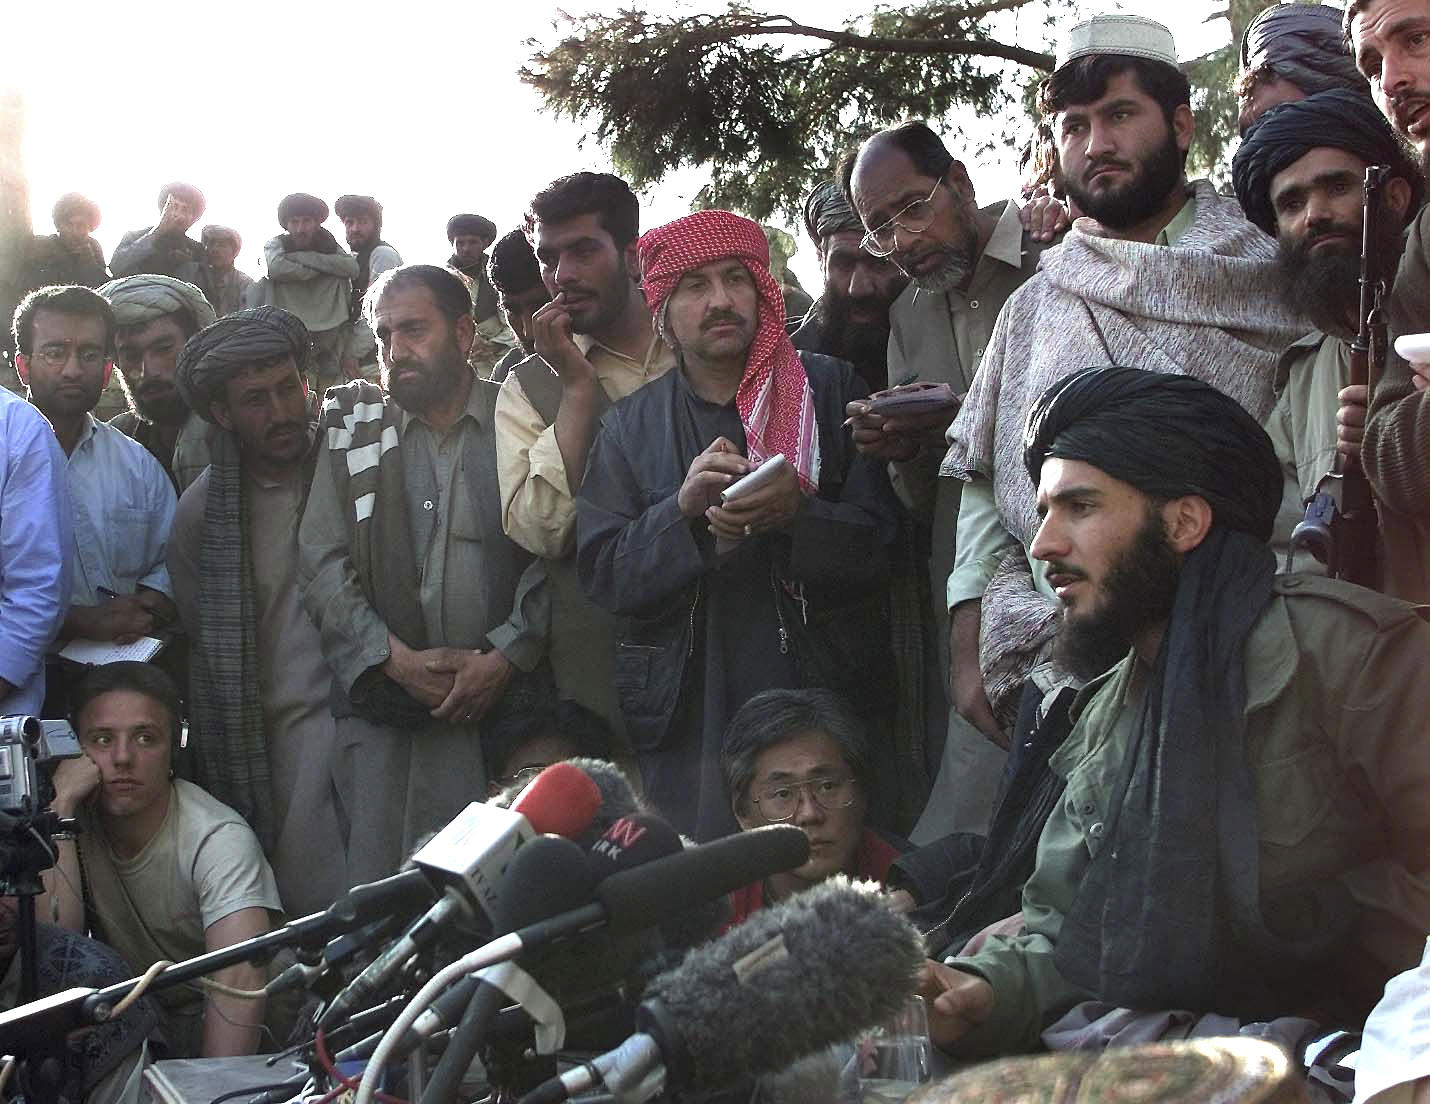 A Taliban spokesman said they would not give up the south (Nov. 21, 2001). Much has changed in Afghanistan since then, but there are still some areas of the country that value the Taliban way of life and moral code of conduct. NYT/Ruth Fremson